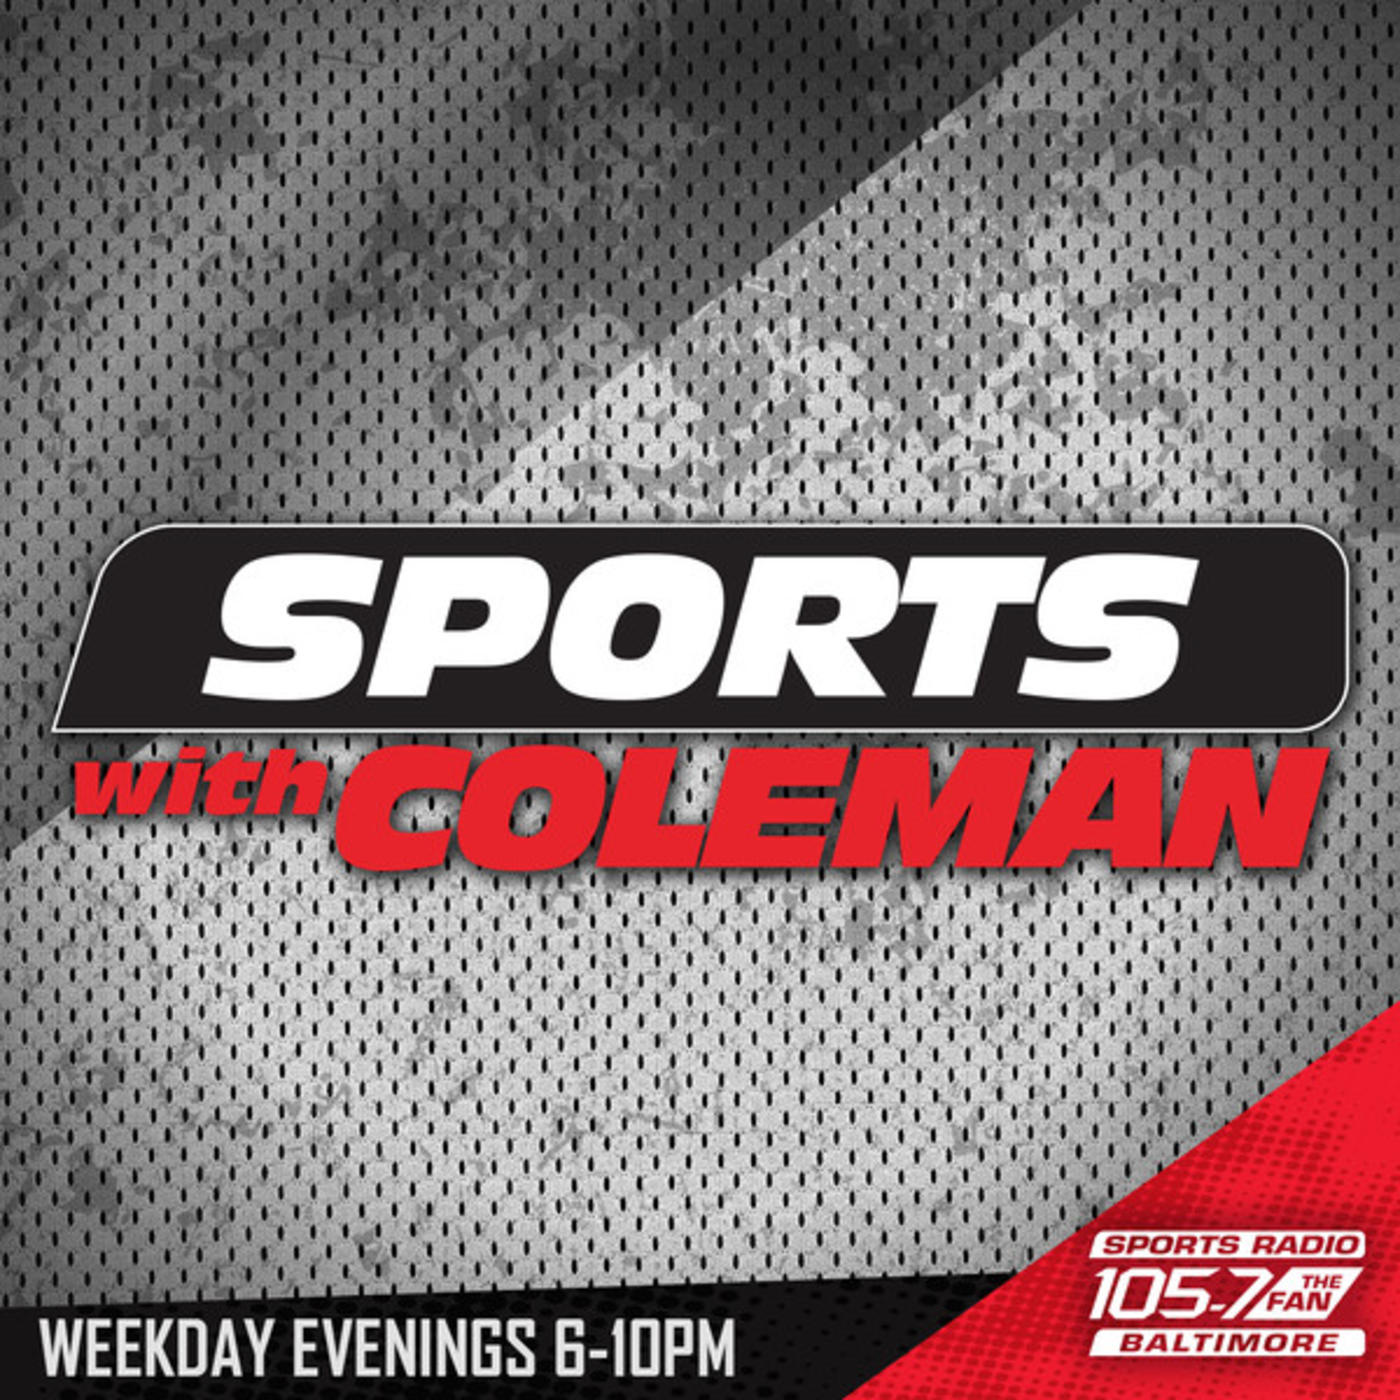 Pam Shriver Joined Sports With Coleman